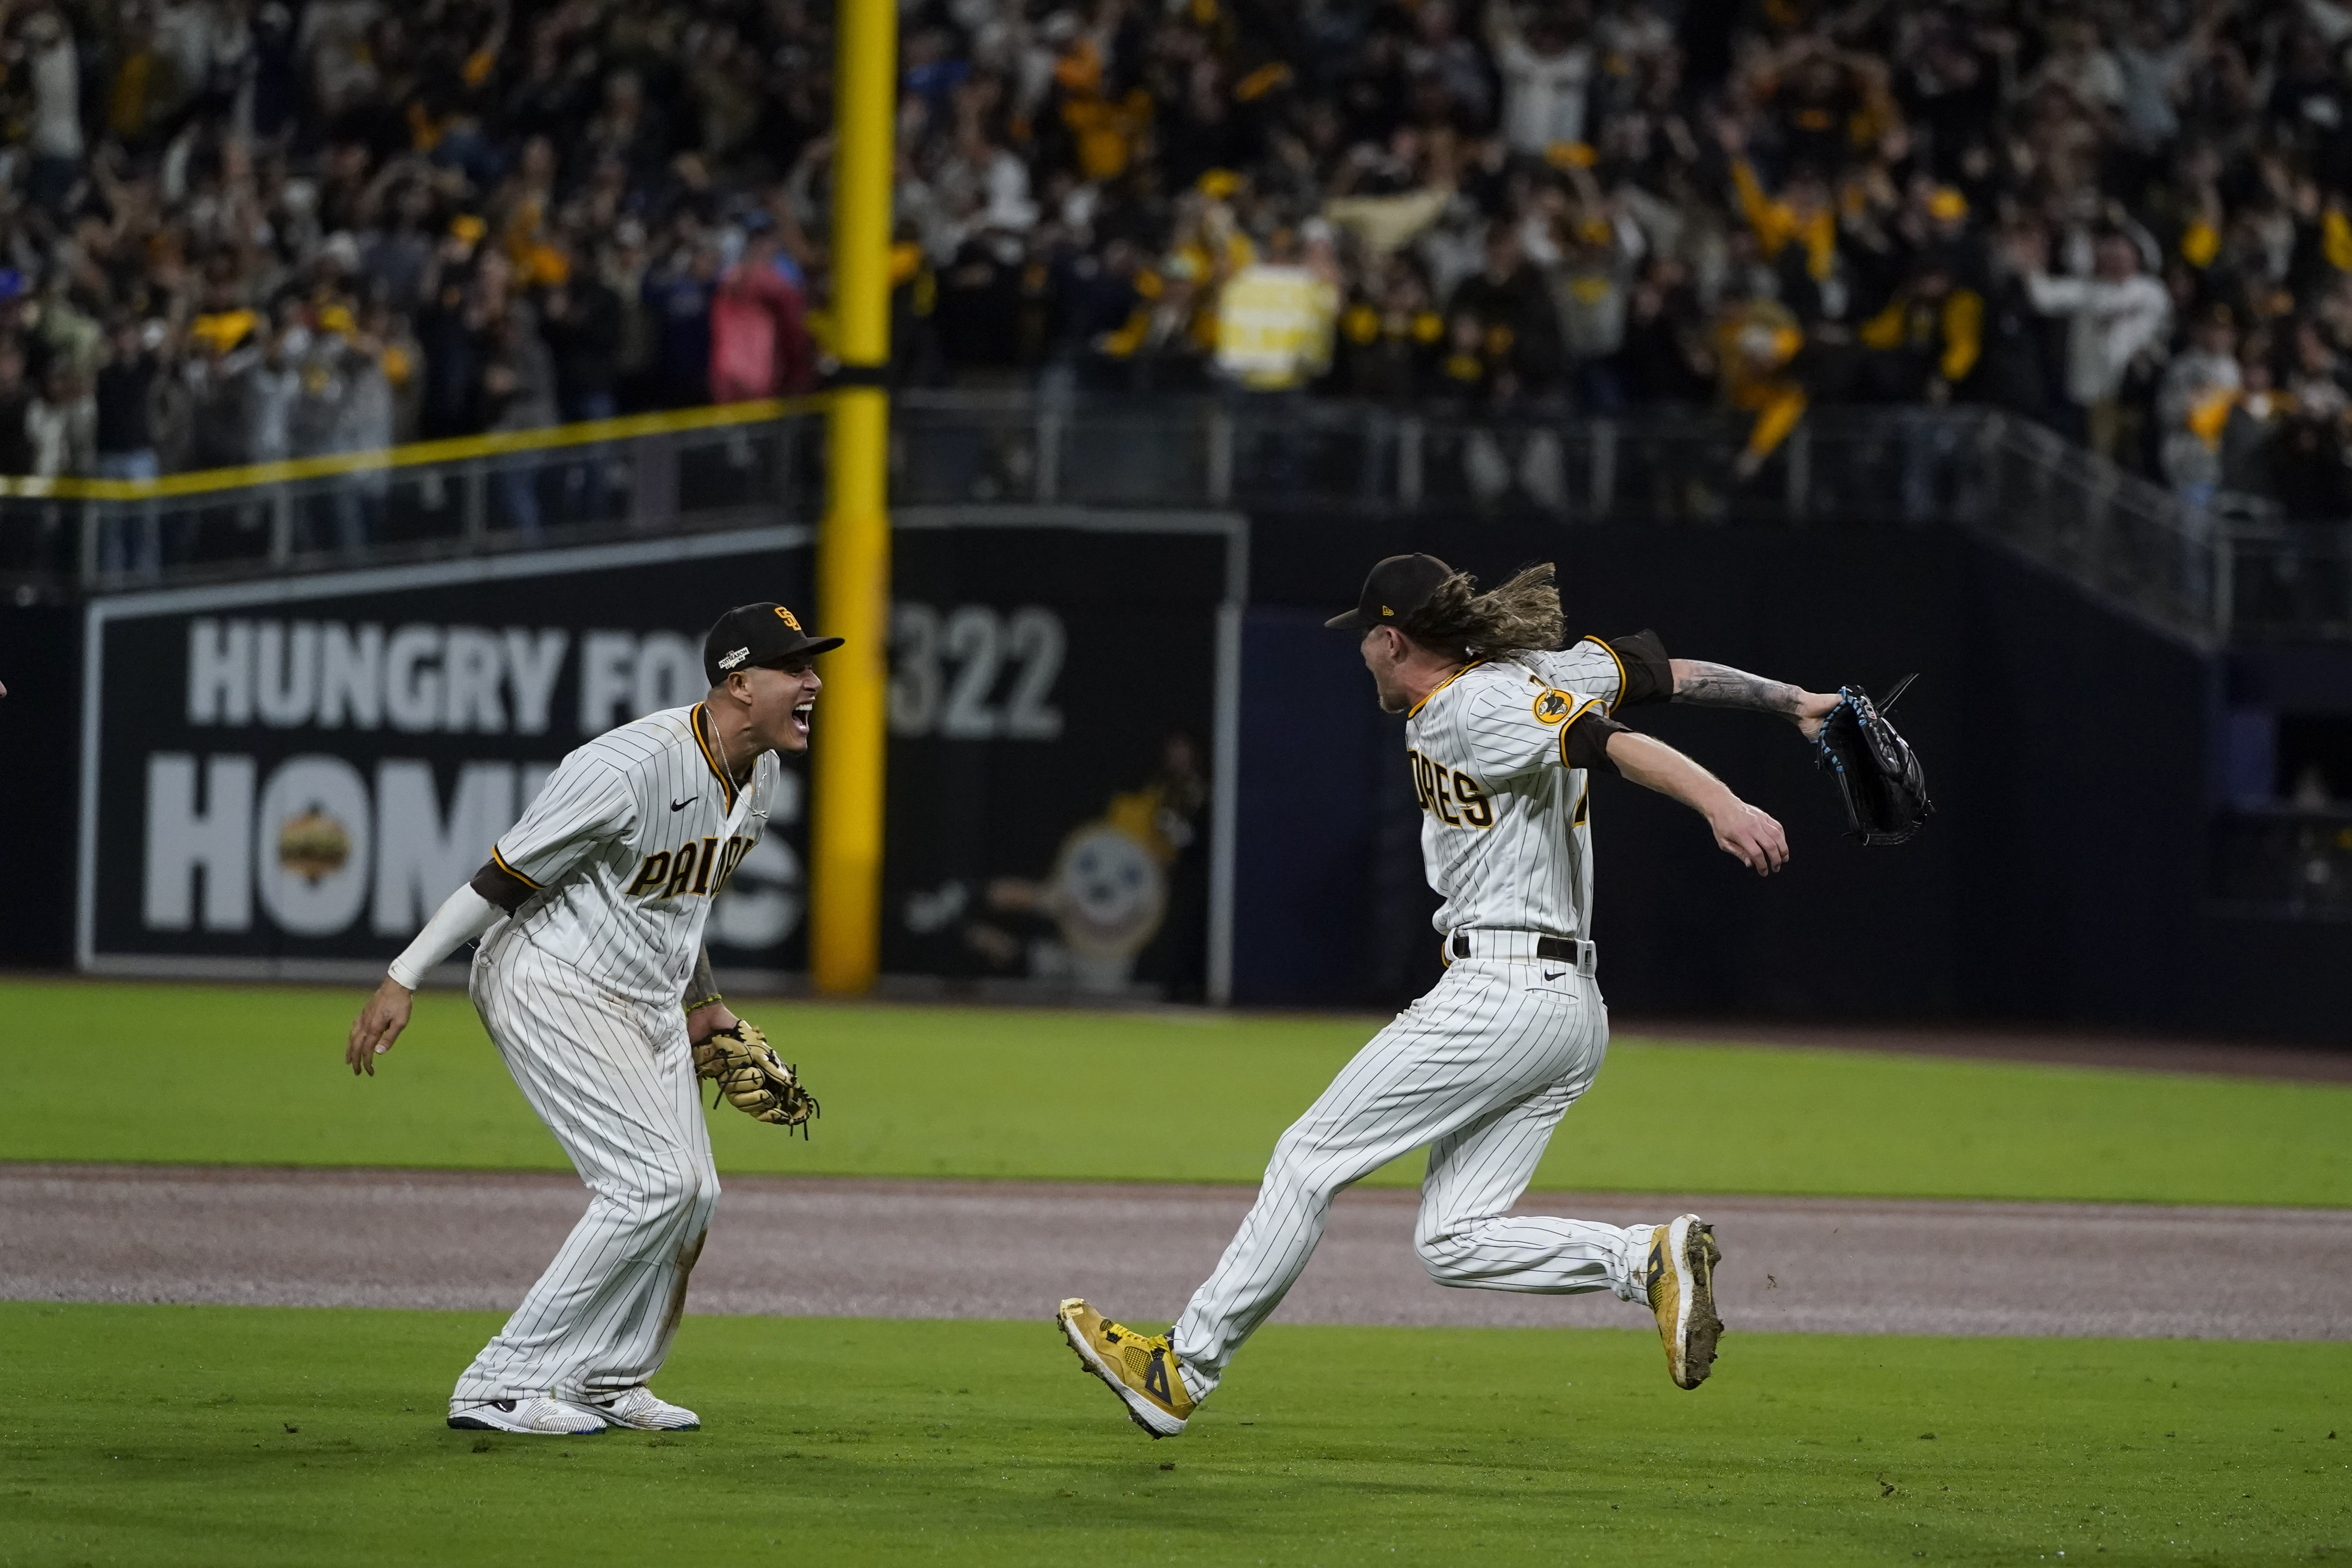 NLDS Game 4 'full circle' event for Joe Musgrove, Jake Peavy - The